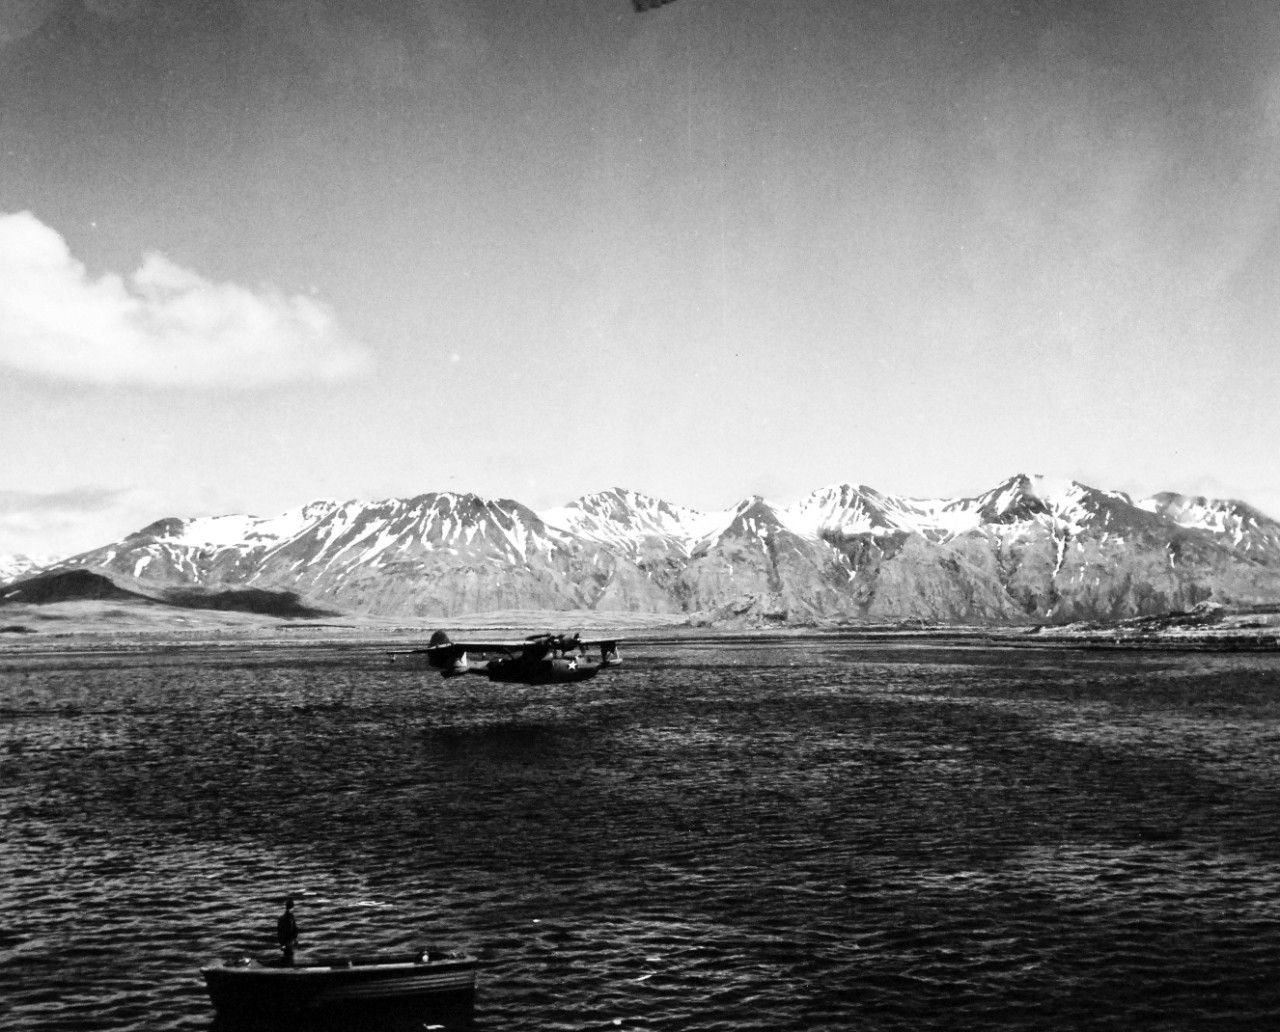 80-G-475734:   PBY-5 “Catalina” patrol bomber, July 1943.   PBY-5 comes in for landing near seaplane tender in Attu Harbor in Aleutians  Photographed by Lieutenant Horace Bristol, July 1943.  TR-5228.  U.S. Navy photograph, now in the collections of the National Archives.  (2015/11/17).